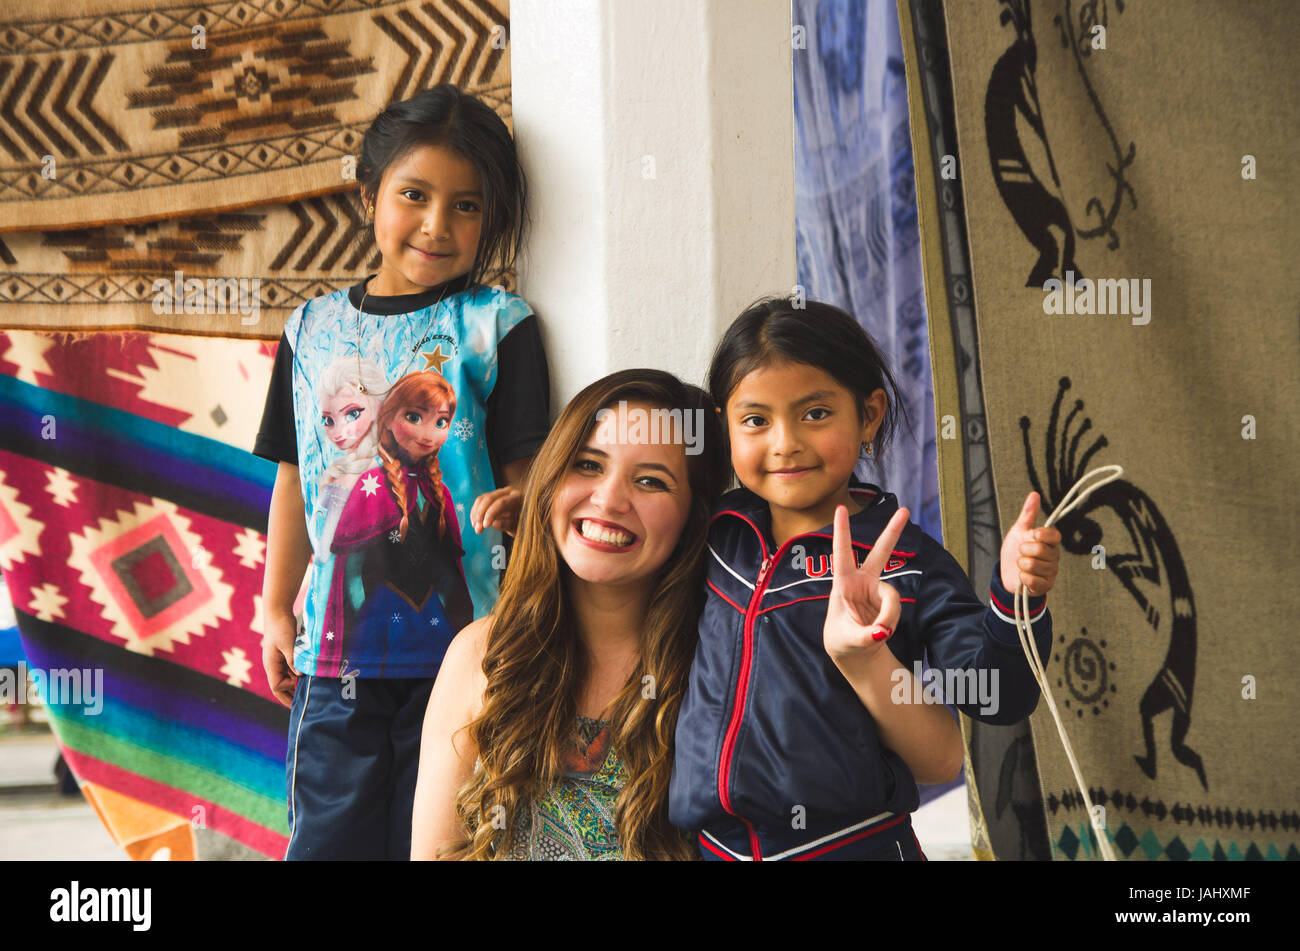 OTAVALO, ECUADOR - MAY 17, 2017: Beautiful young woman hugging to two beautiful little indigenous girls, in colorful fabrics background Stock Photo